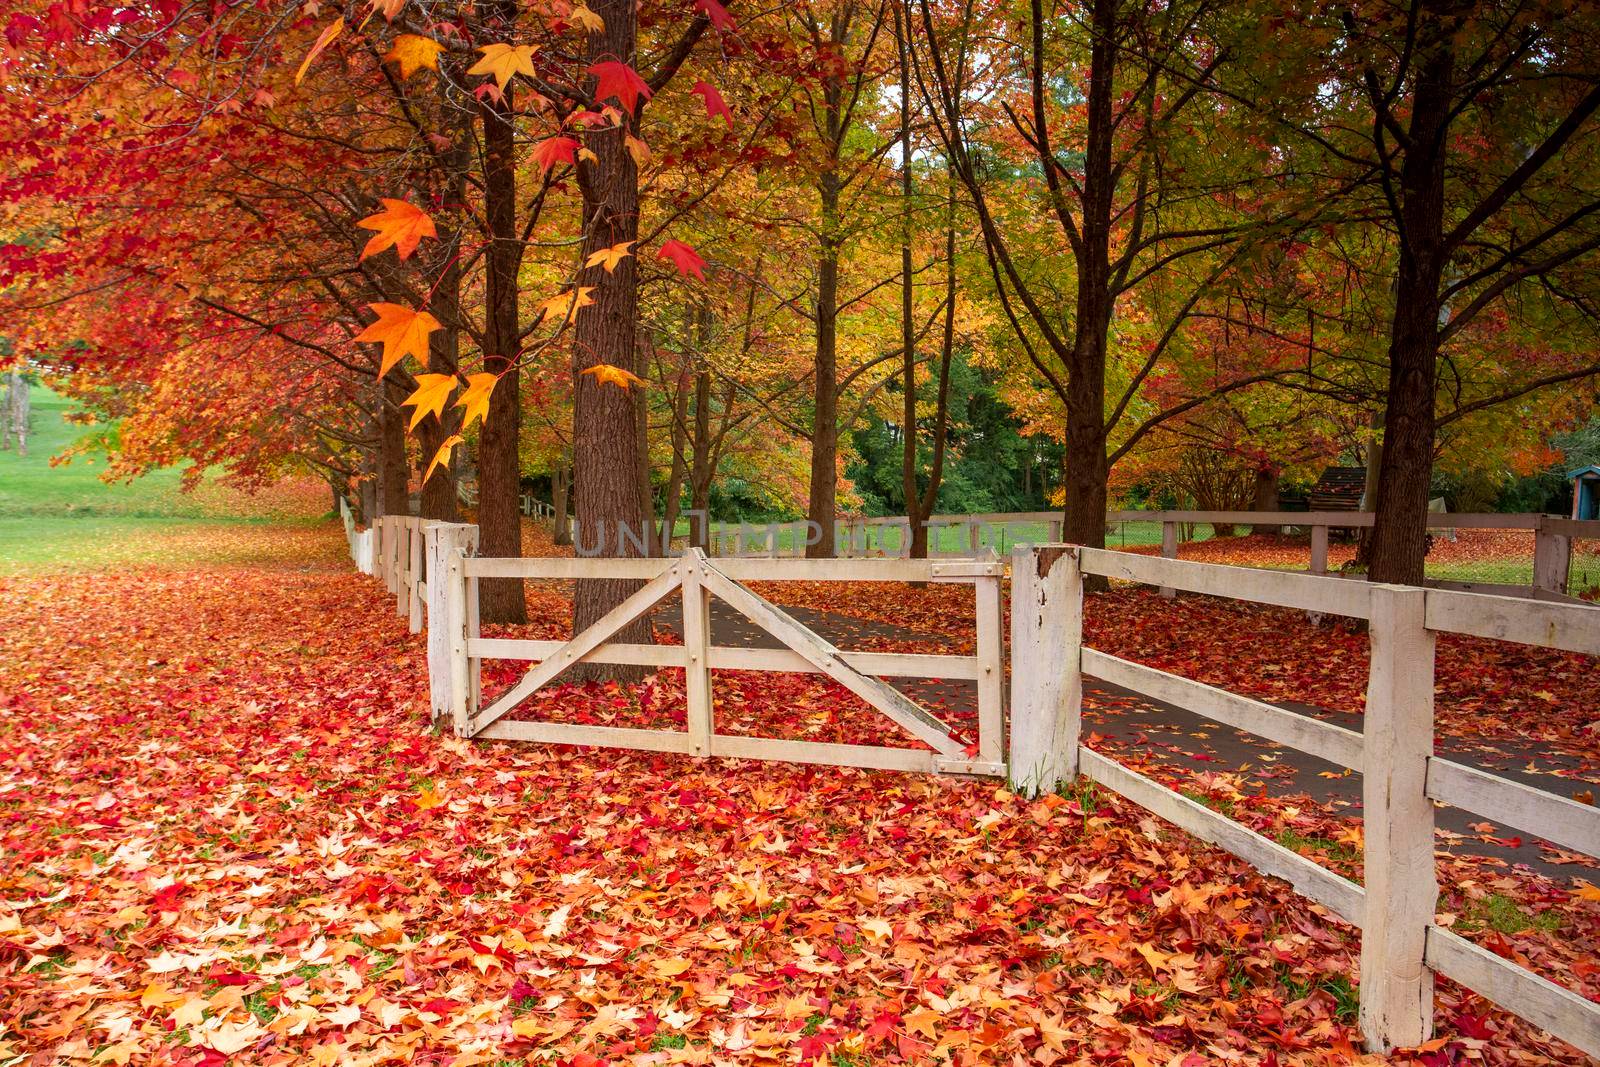 Scenic Autumn countryside a mosaic of fallen leaves on the ground and rustic white timber fences along old country laneway in Australia